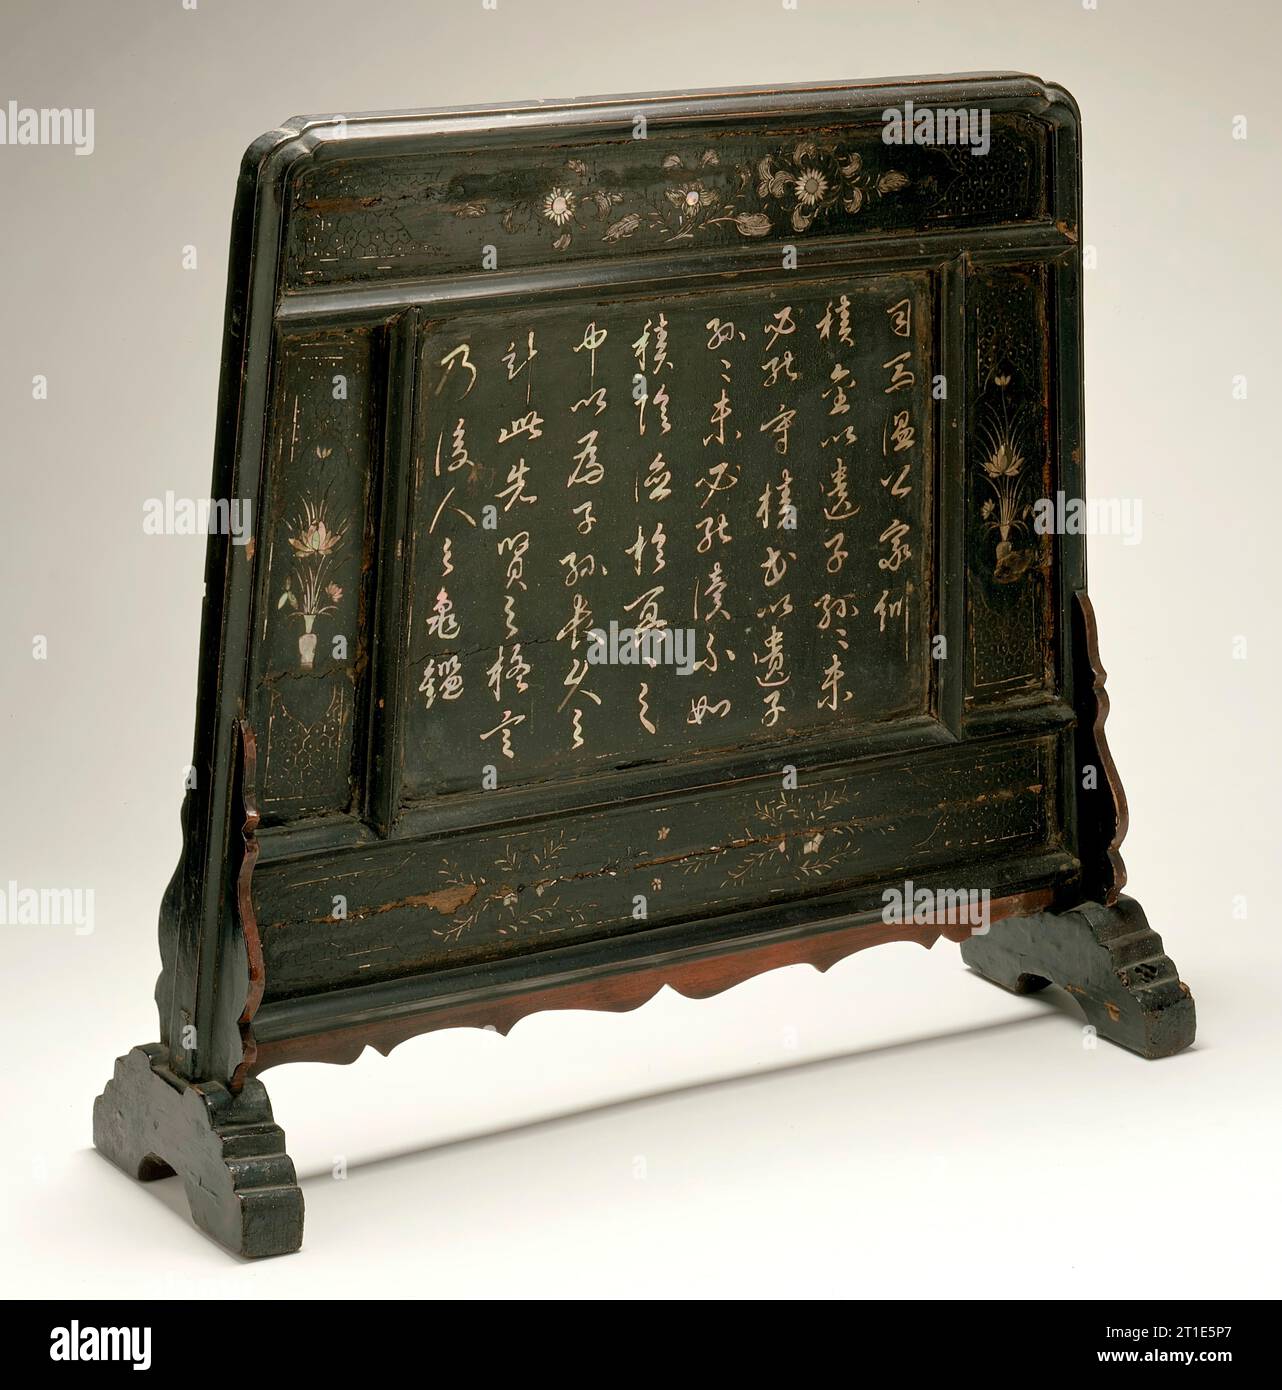 Tablescreen with Calligraphy of Sima Guang's (1019-1086) Family Instructions, between 1127 and 1279. Stock Photo